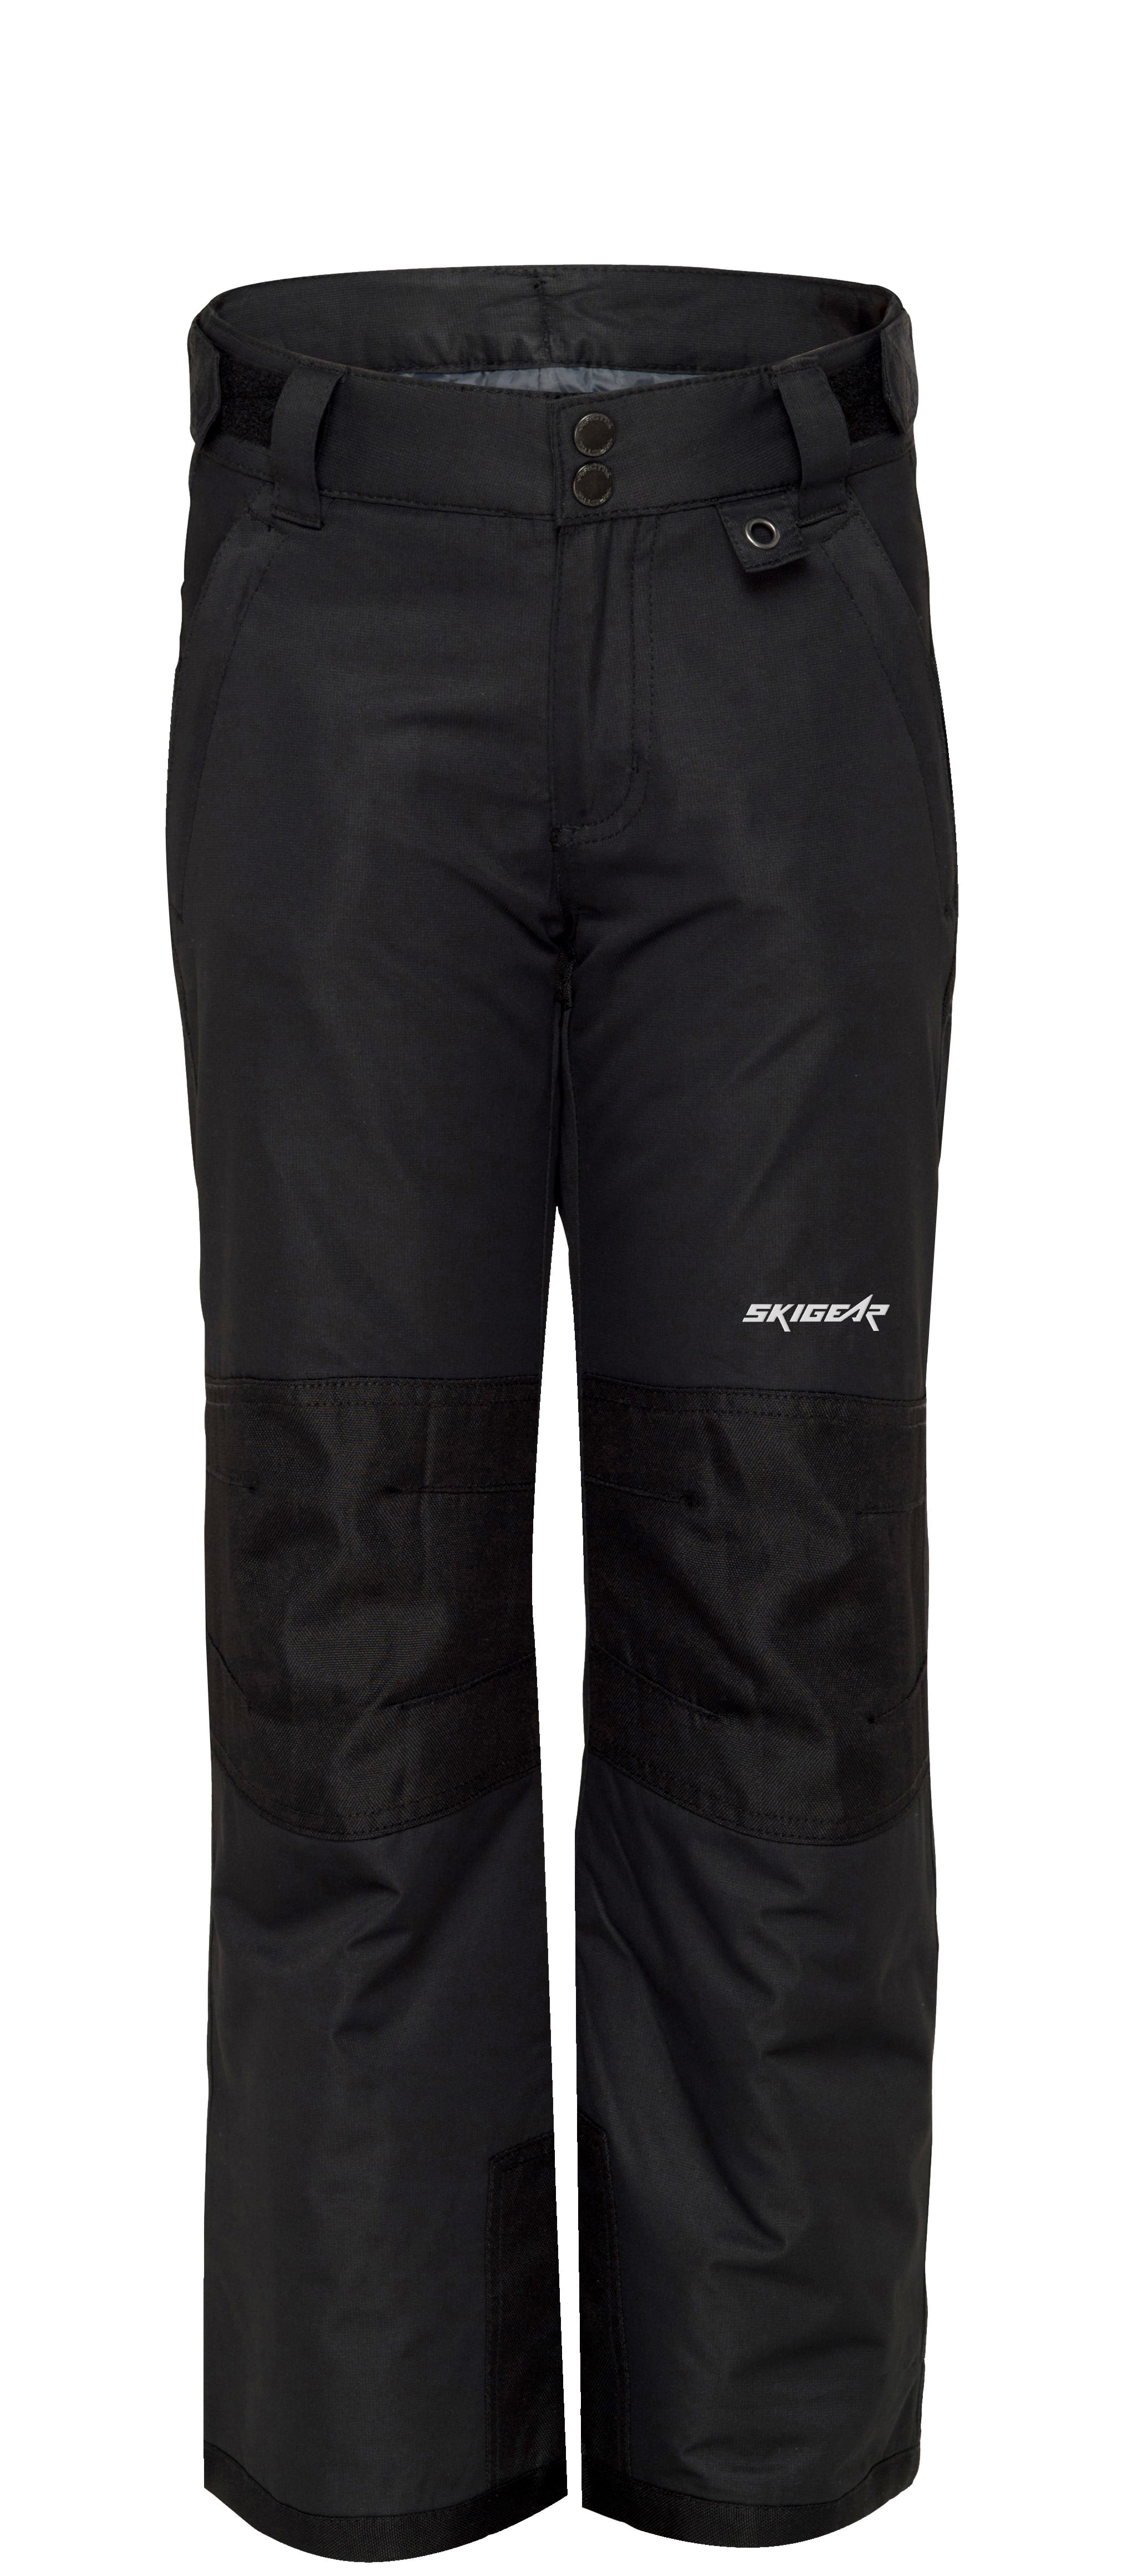 Ski Gear by Arctix Youth Insulated Snow Pants - Large, Black - Walmart.com